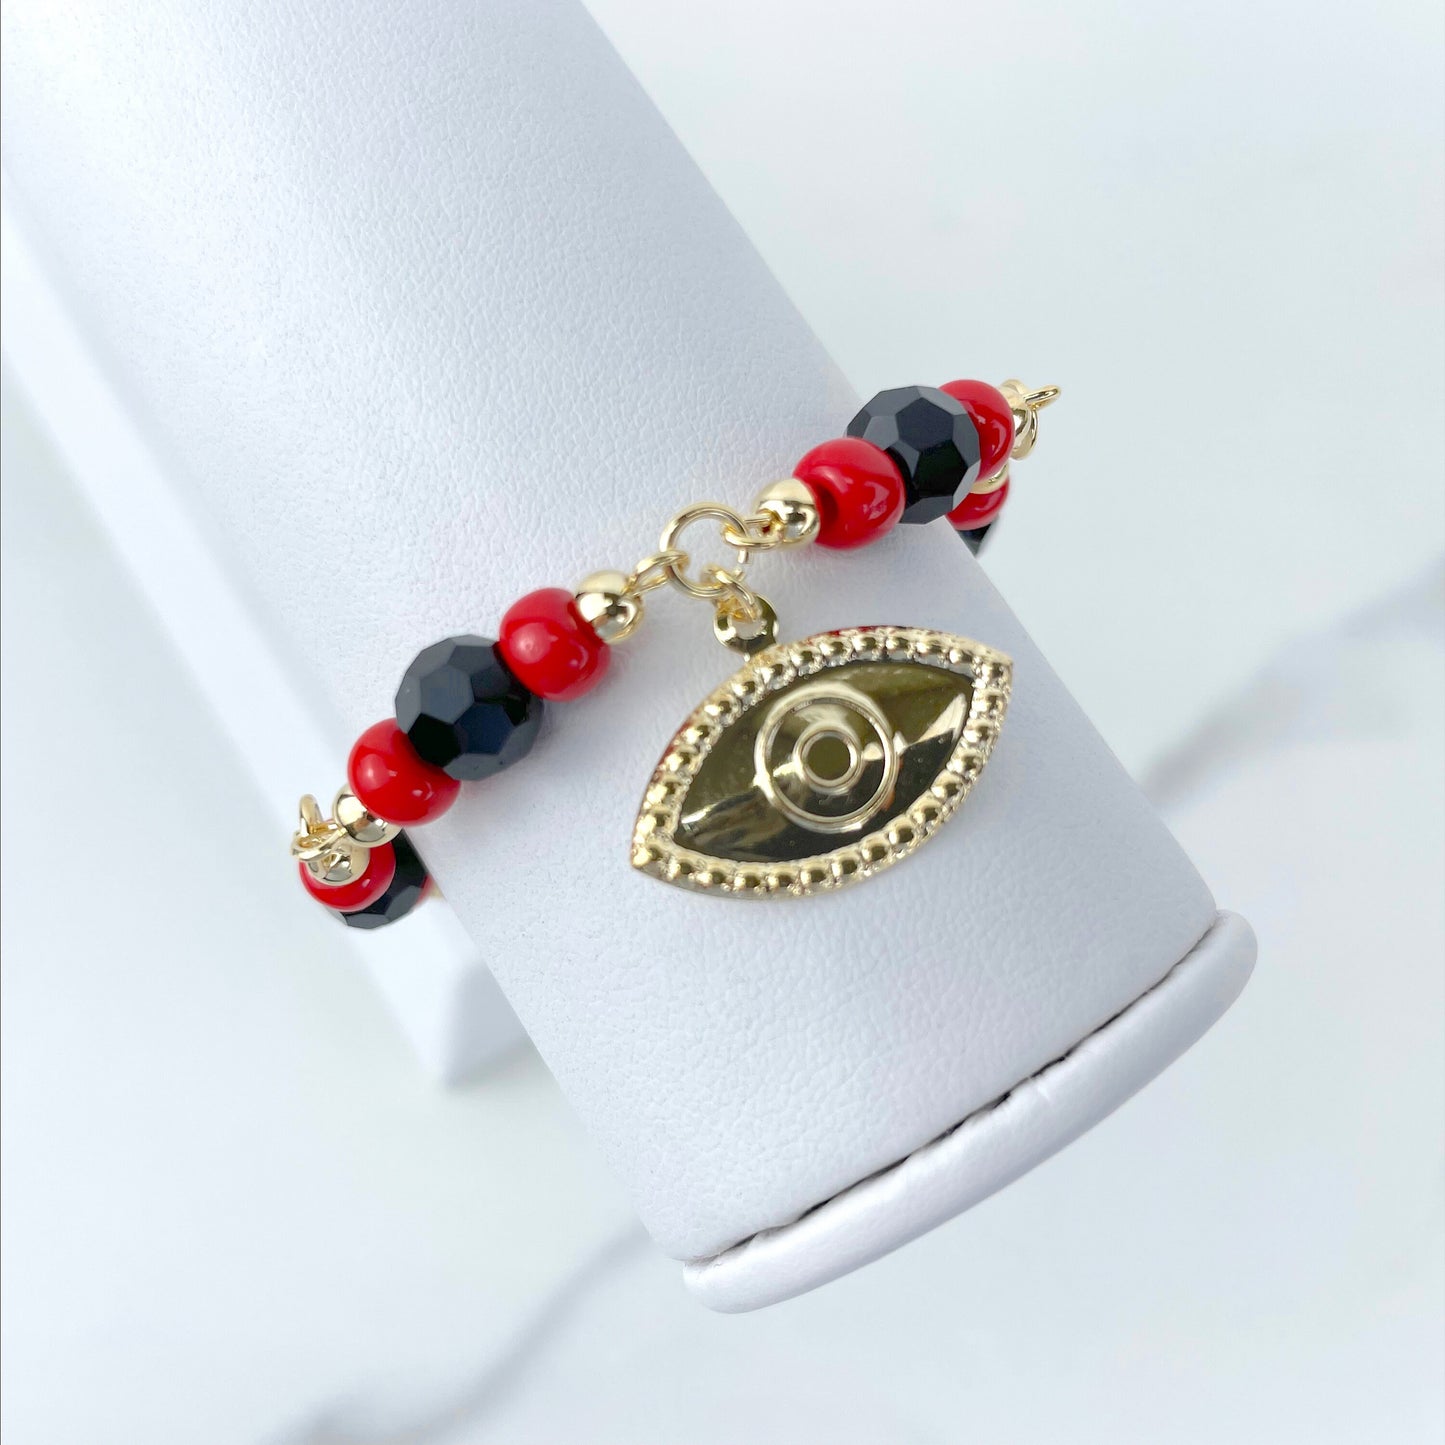 18k Gold Filled Black, Red & Gold Beads, Simulated Azabache, Evil Eye Charms Bracelet Wholesale Jewelry Making Supplies